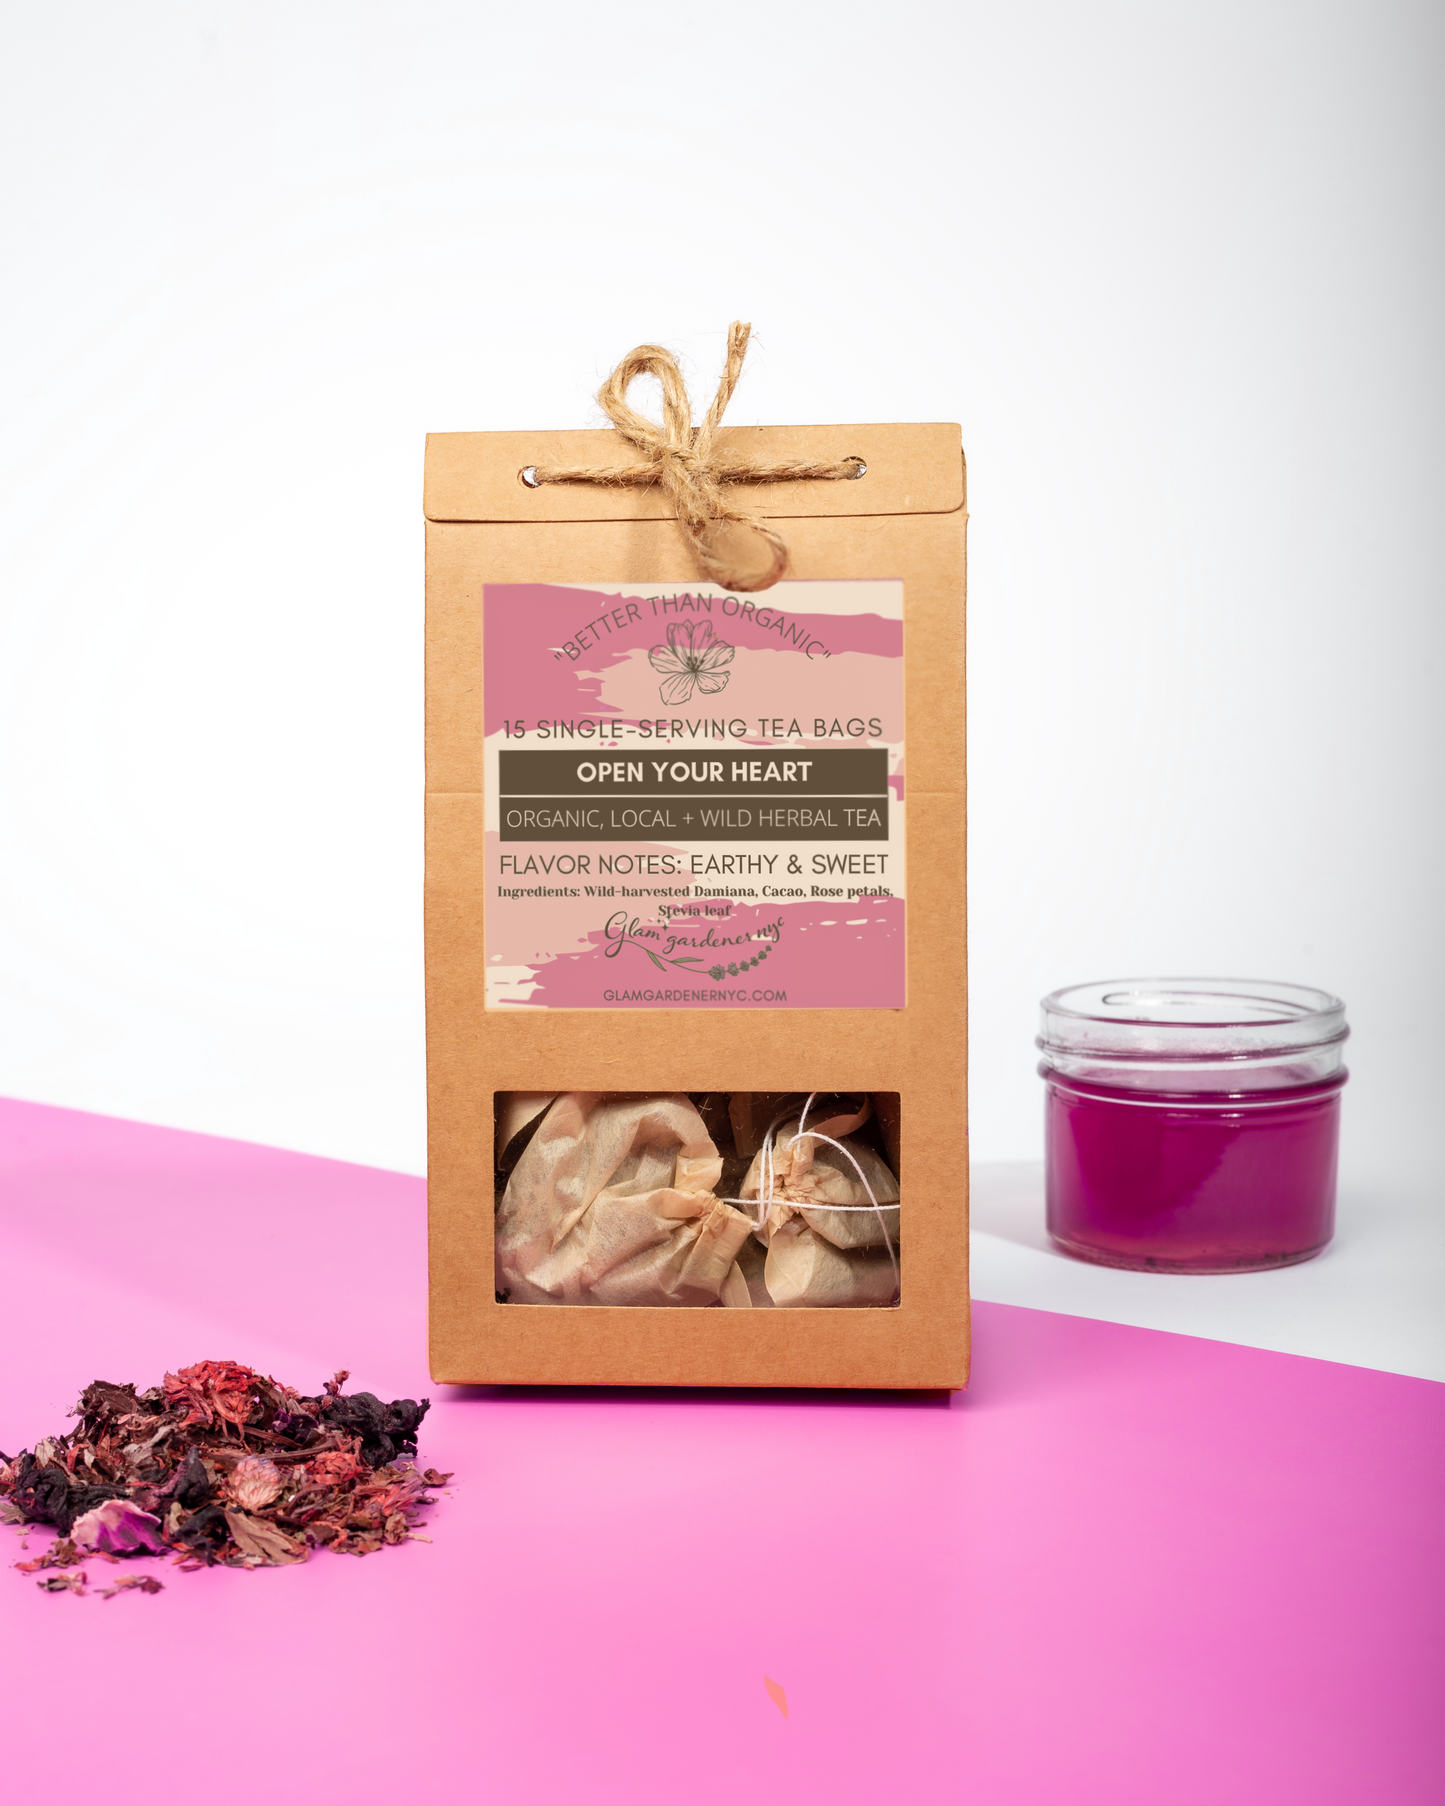 Open your heart bagged herbal tea (designed to uplift and open your heart)